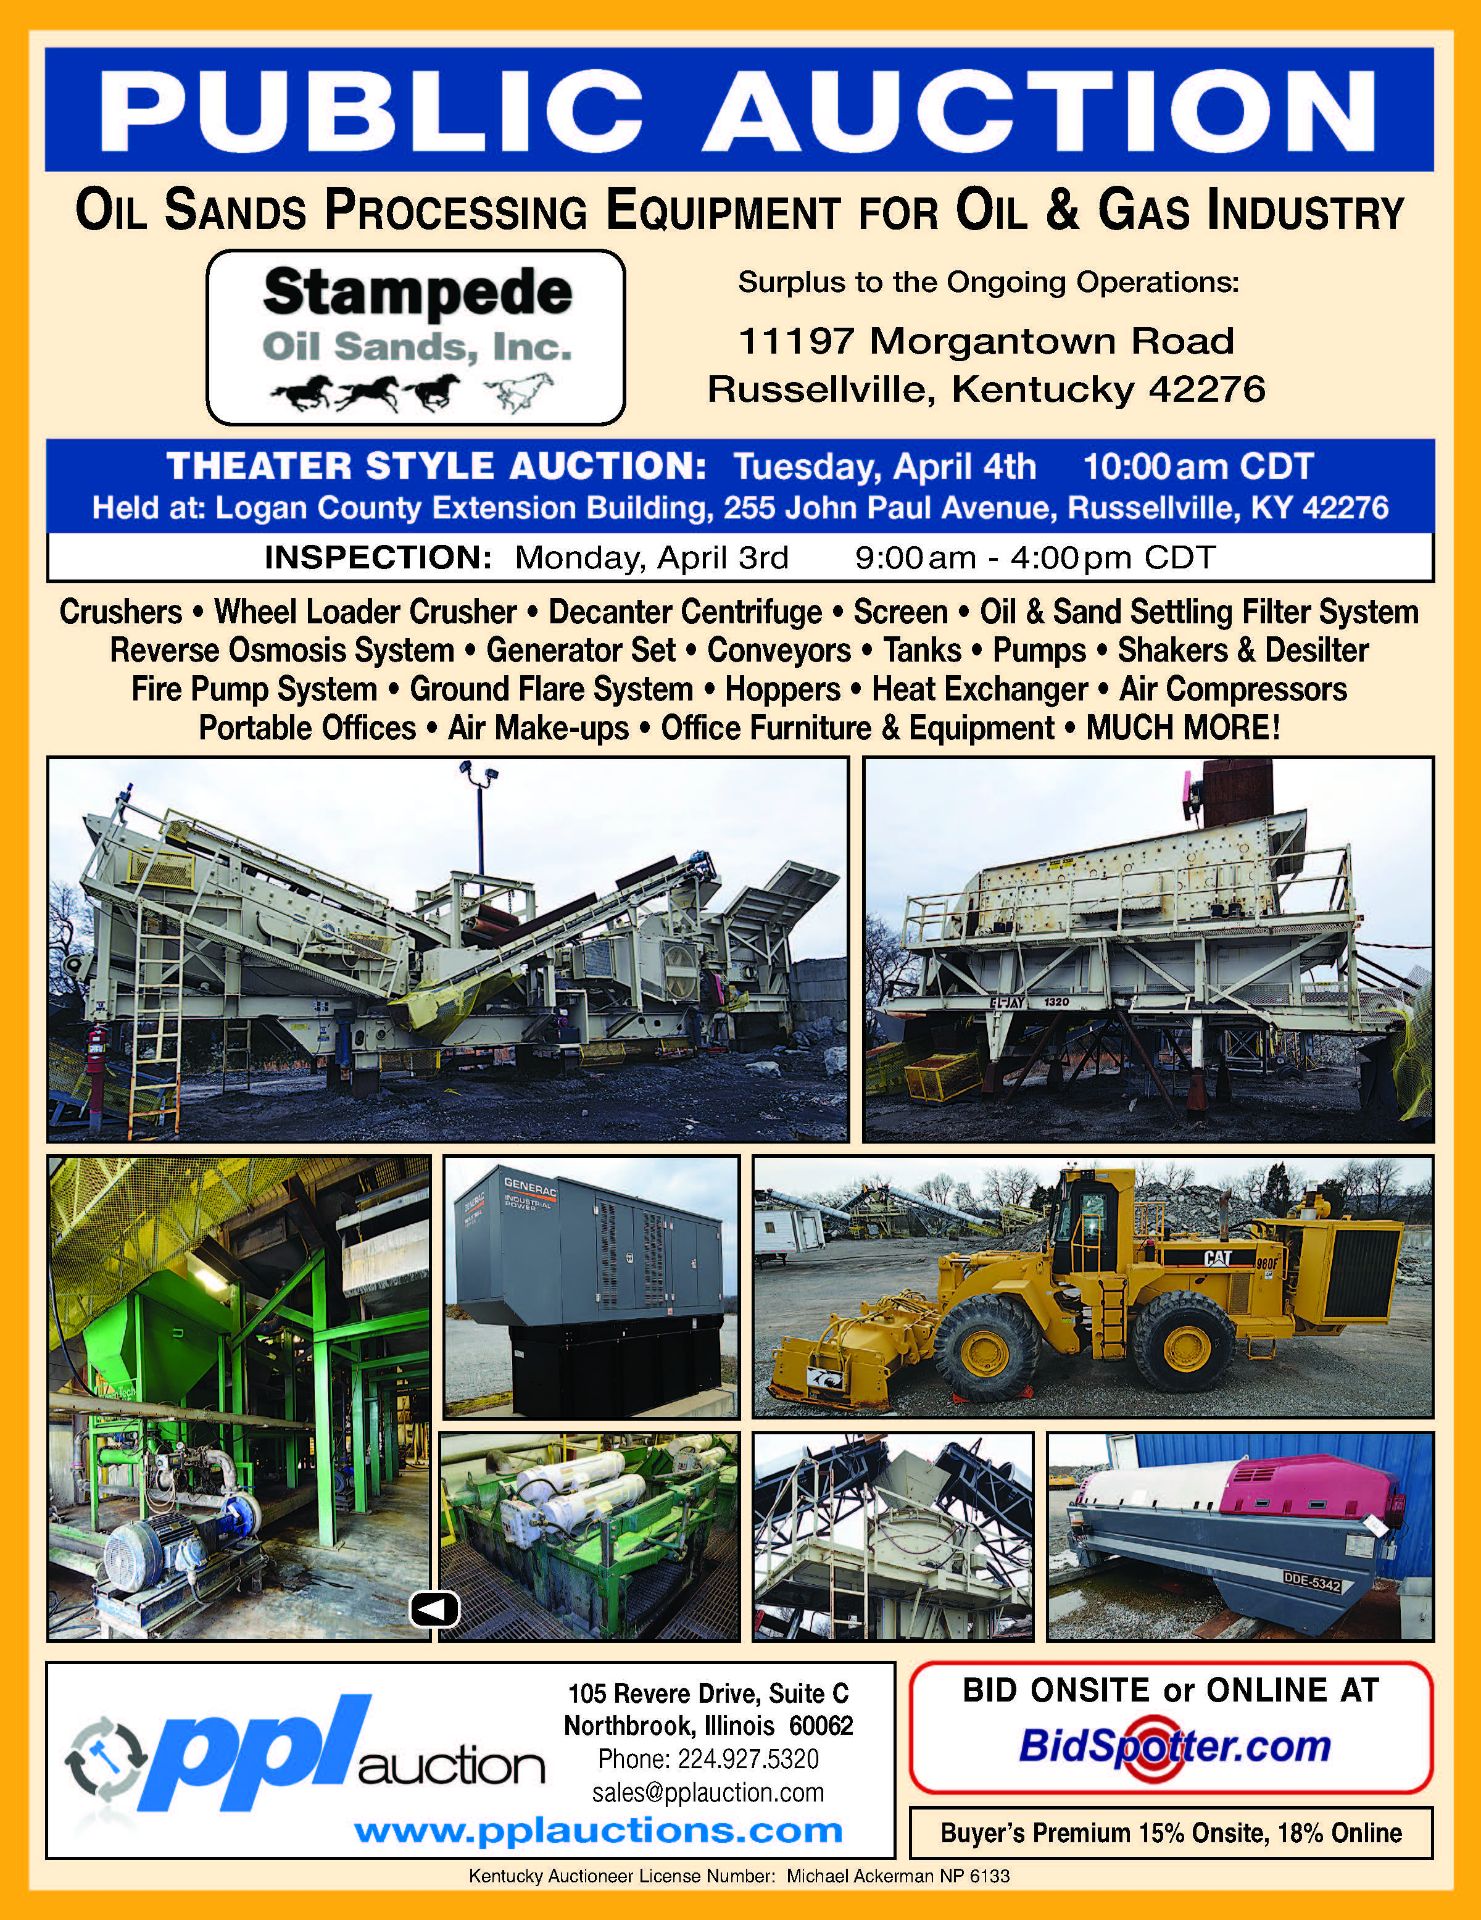 Oil Sands Processing Equipment For Oil & Gas Industry